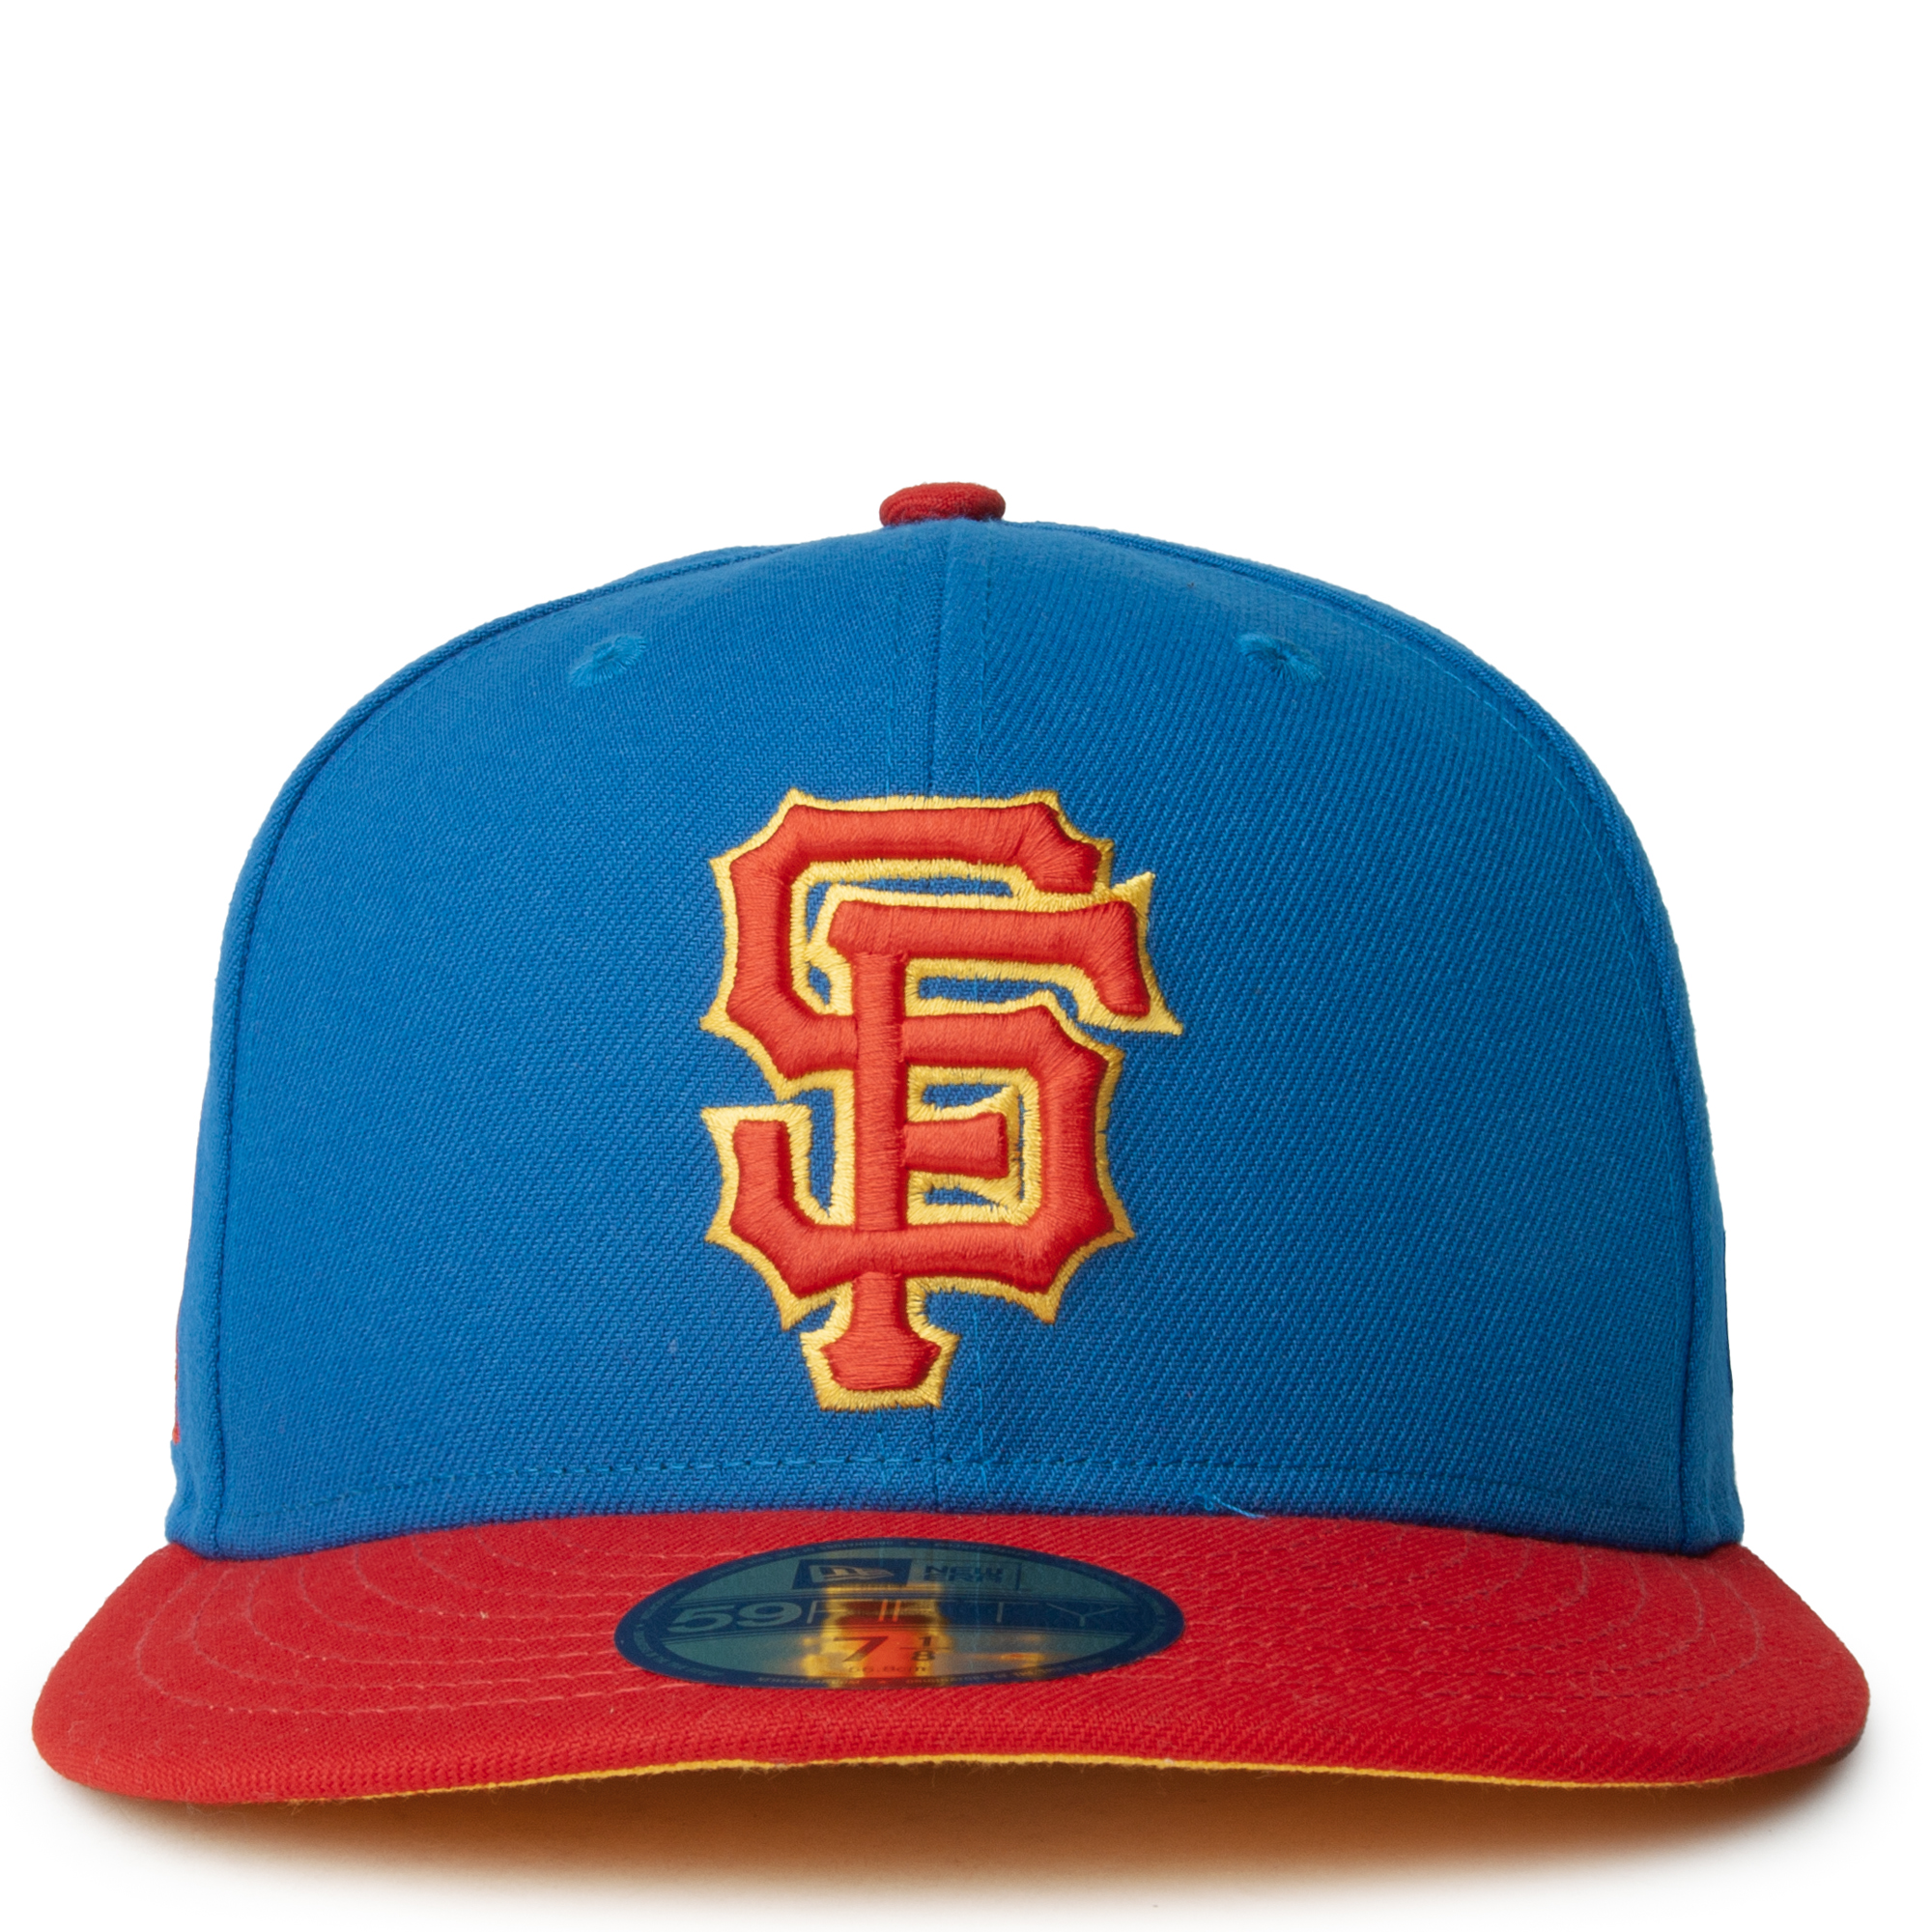 New Era Caps San Francisco Giants Blue Red 59FIFTY Fitted Cap Blue/Gold